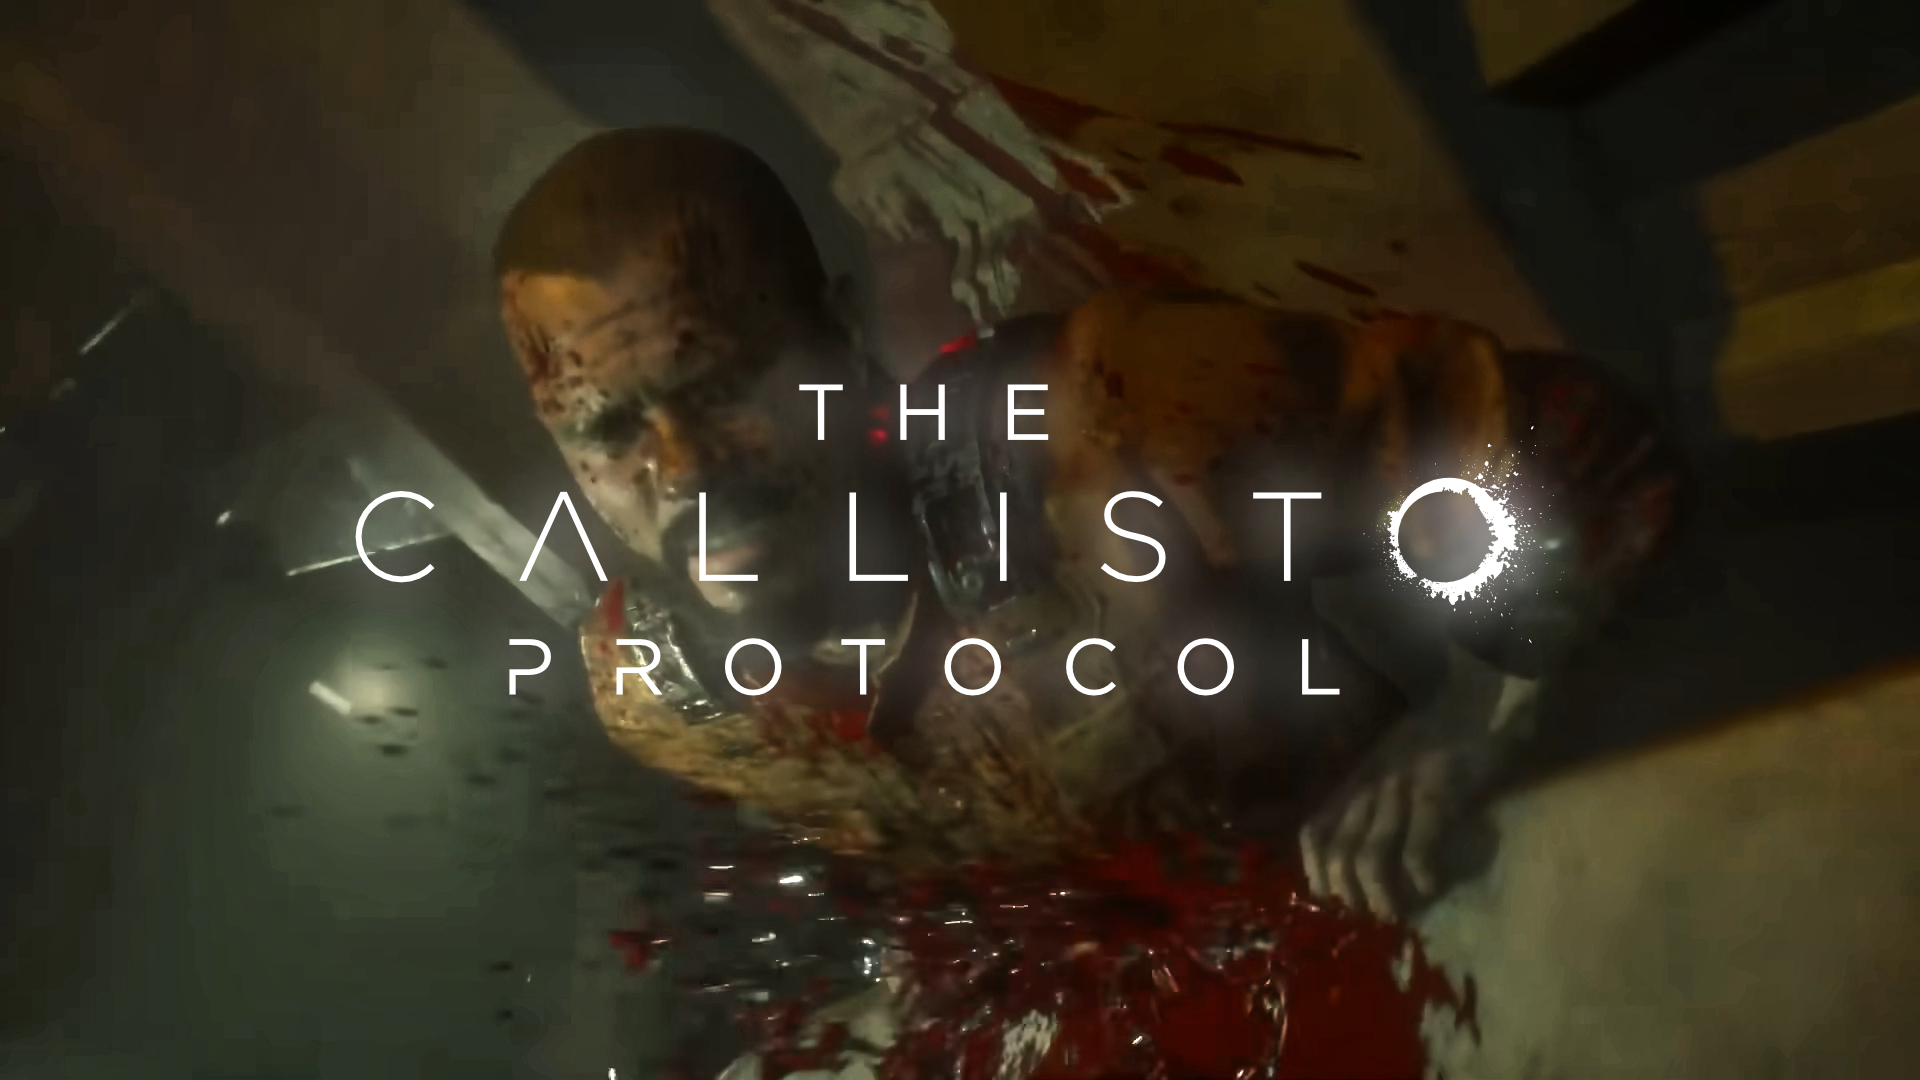 Where is the callisto protocol : r/PlayStationPlus